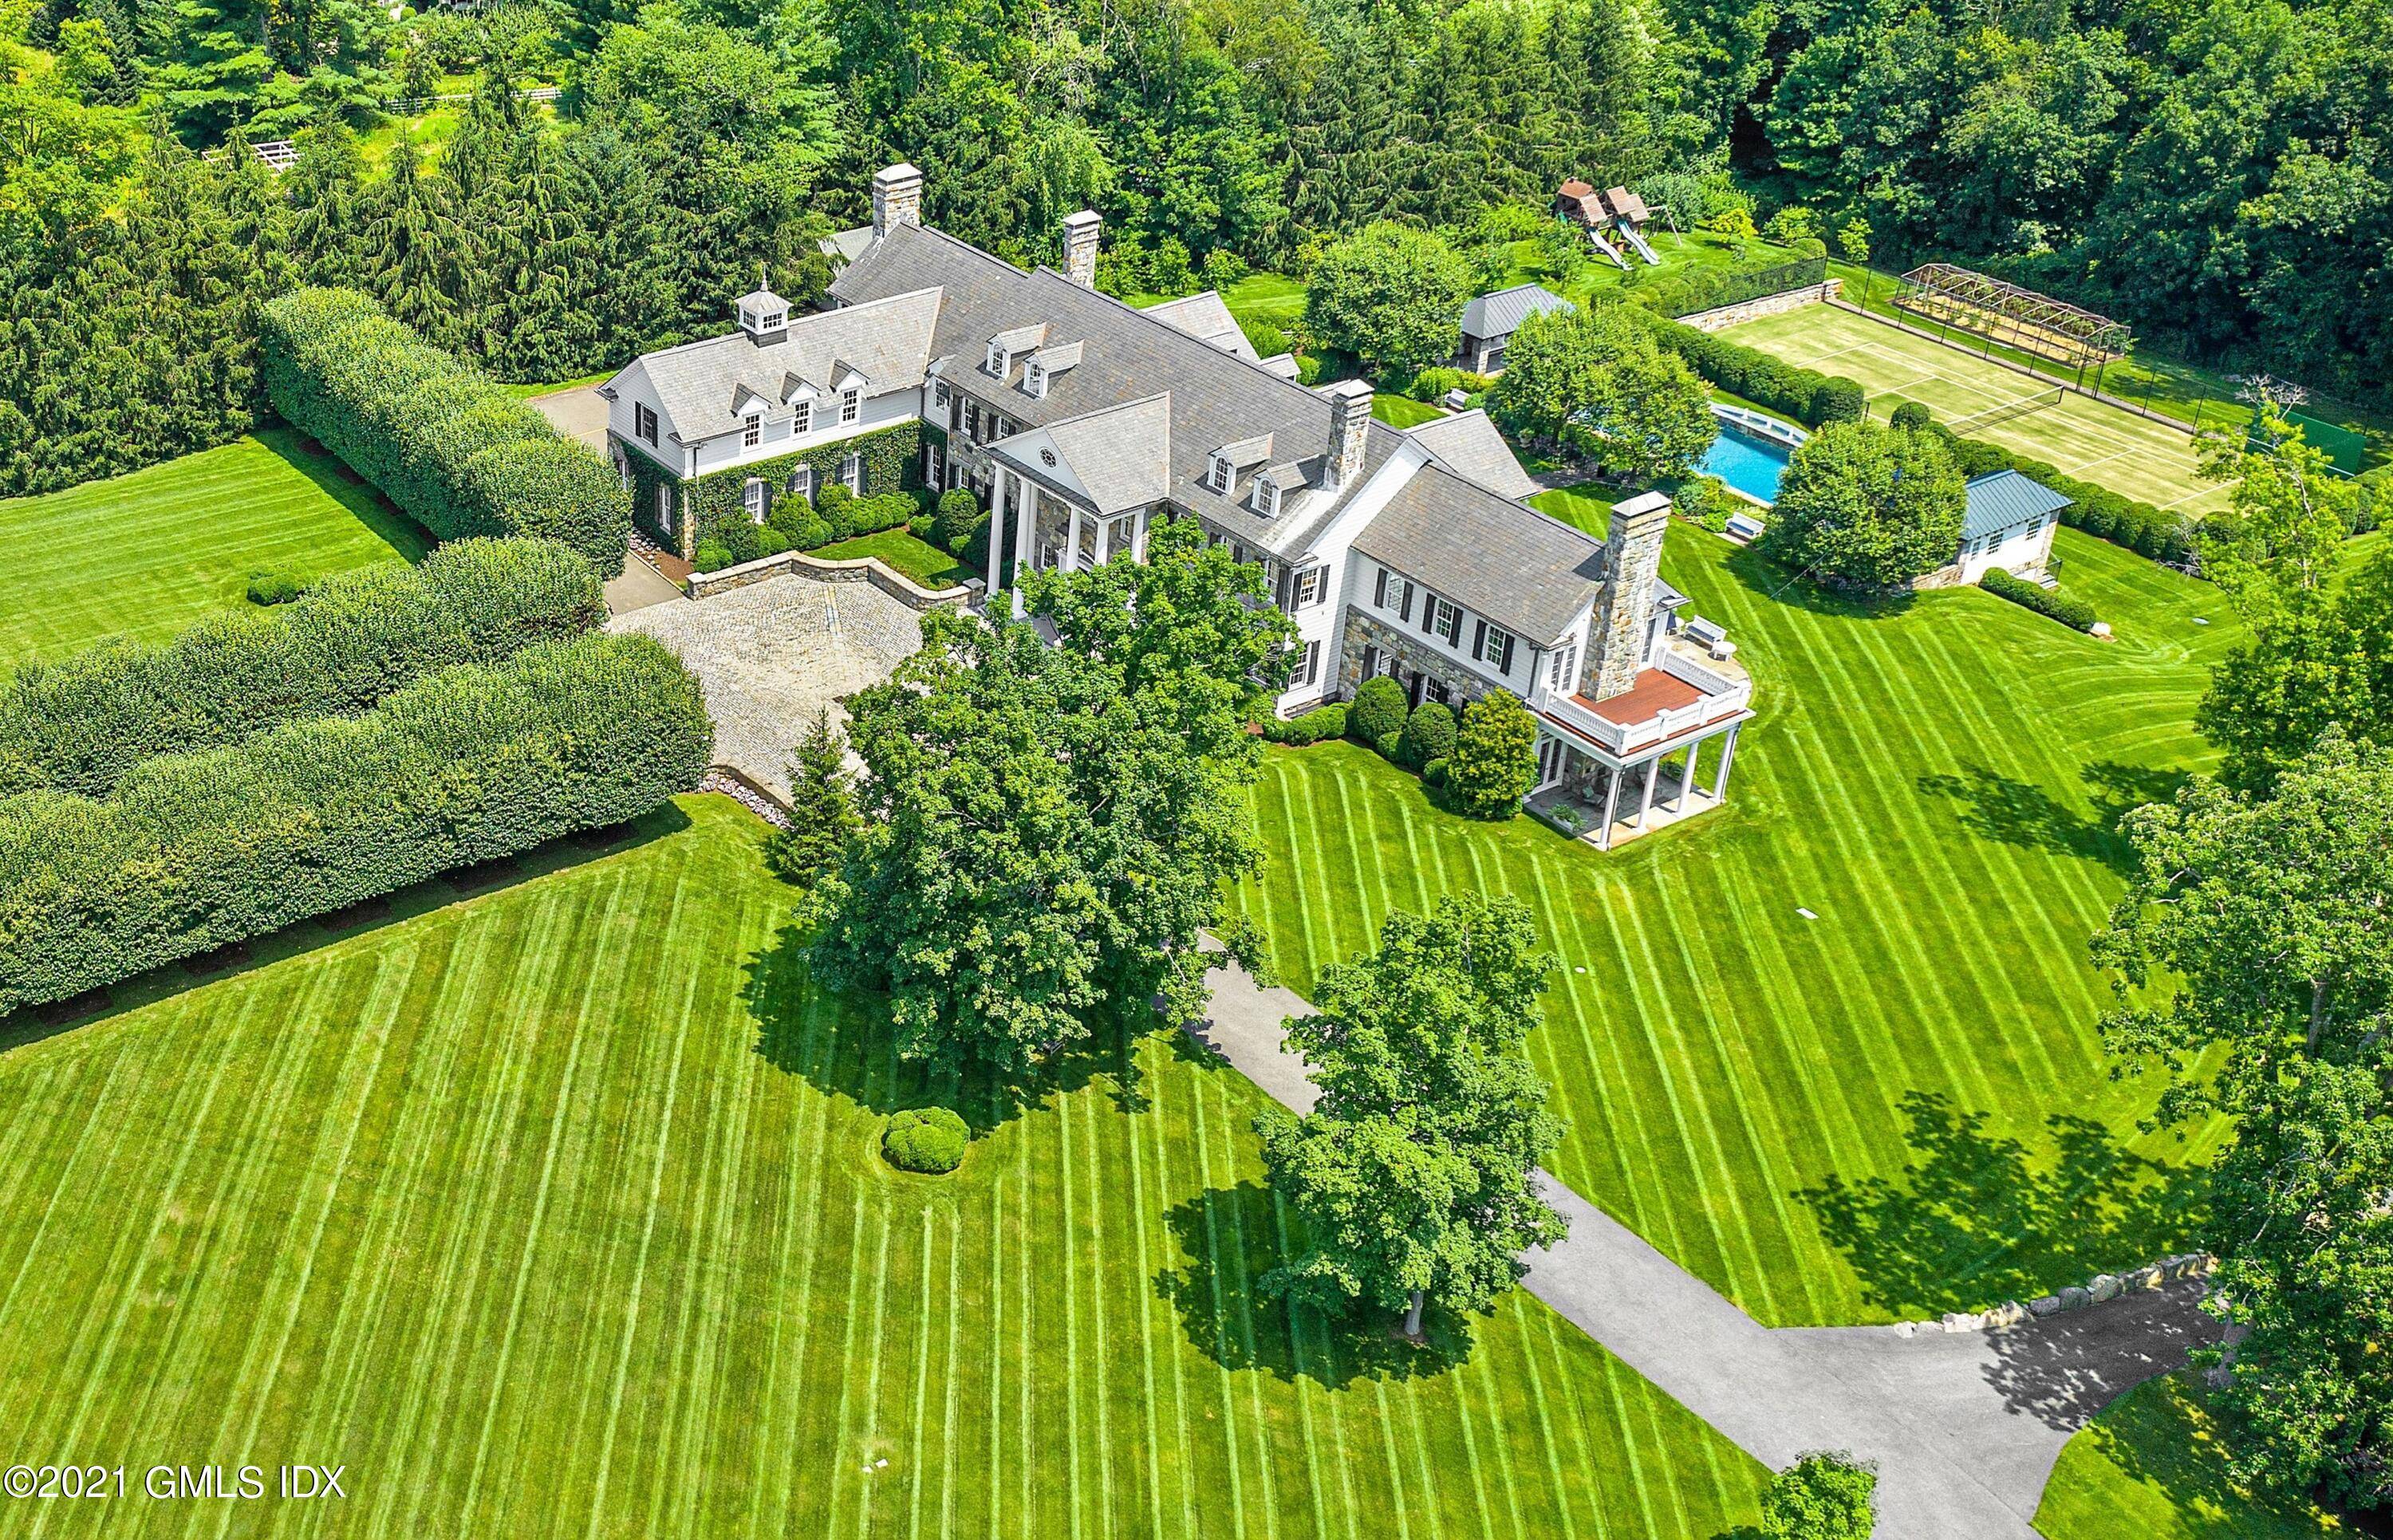 One of a kind offering on 8 acres presents this iconic STONEHILL compound in the coveted Greenwich countryside.